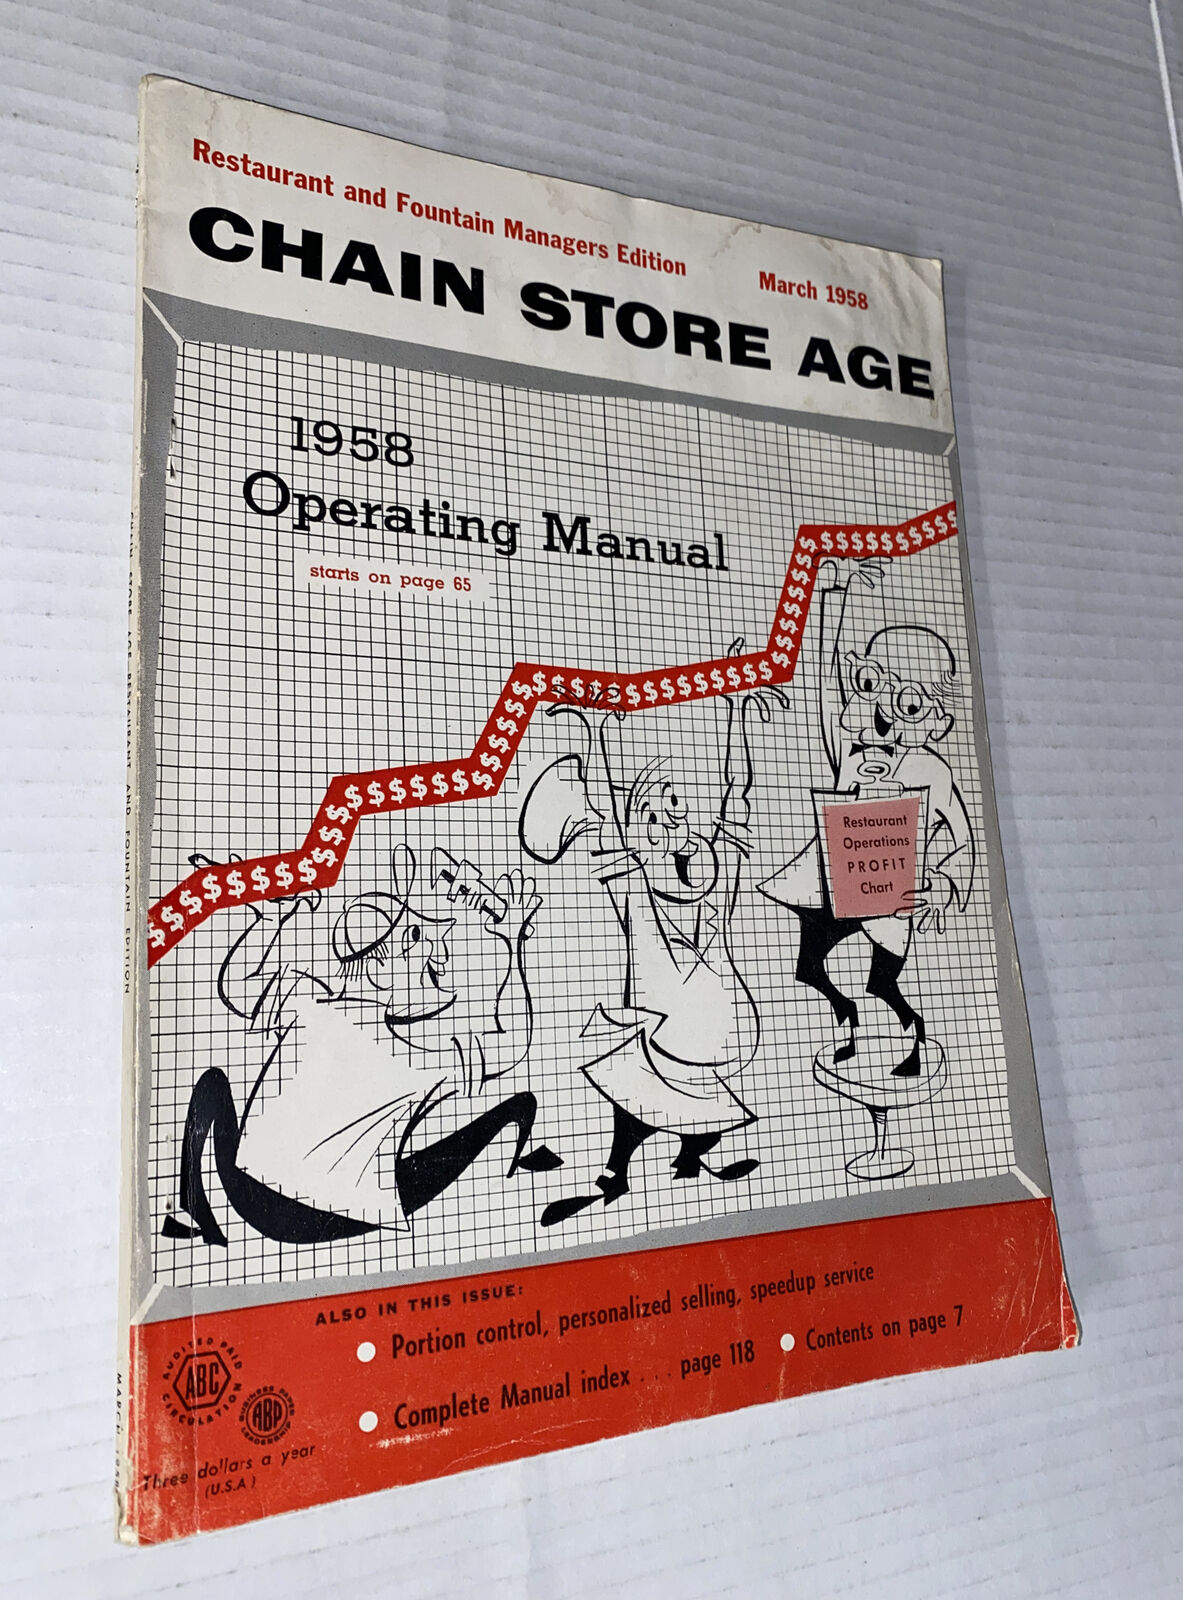 VTG 1950s Chain Store Age Trade Magazine Nehi Campbells Crush Hires ADS MCM prop